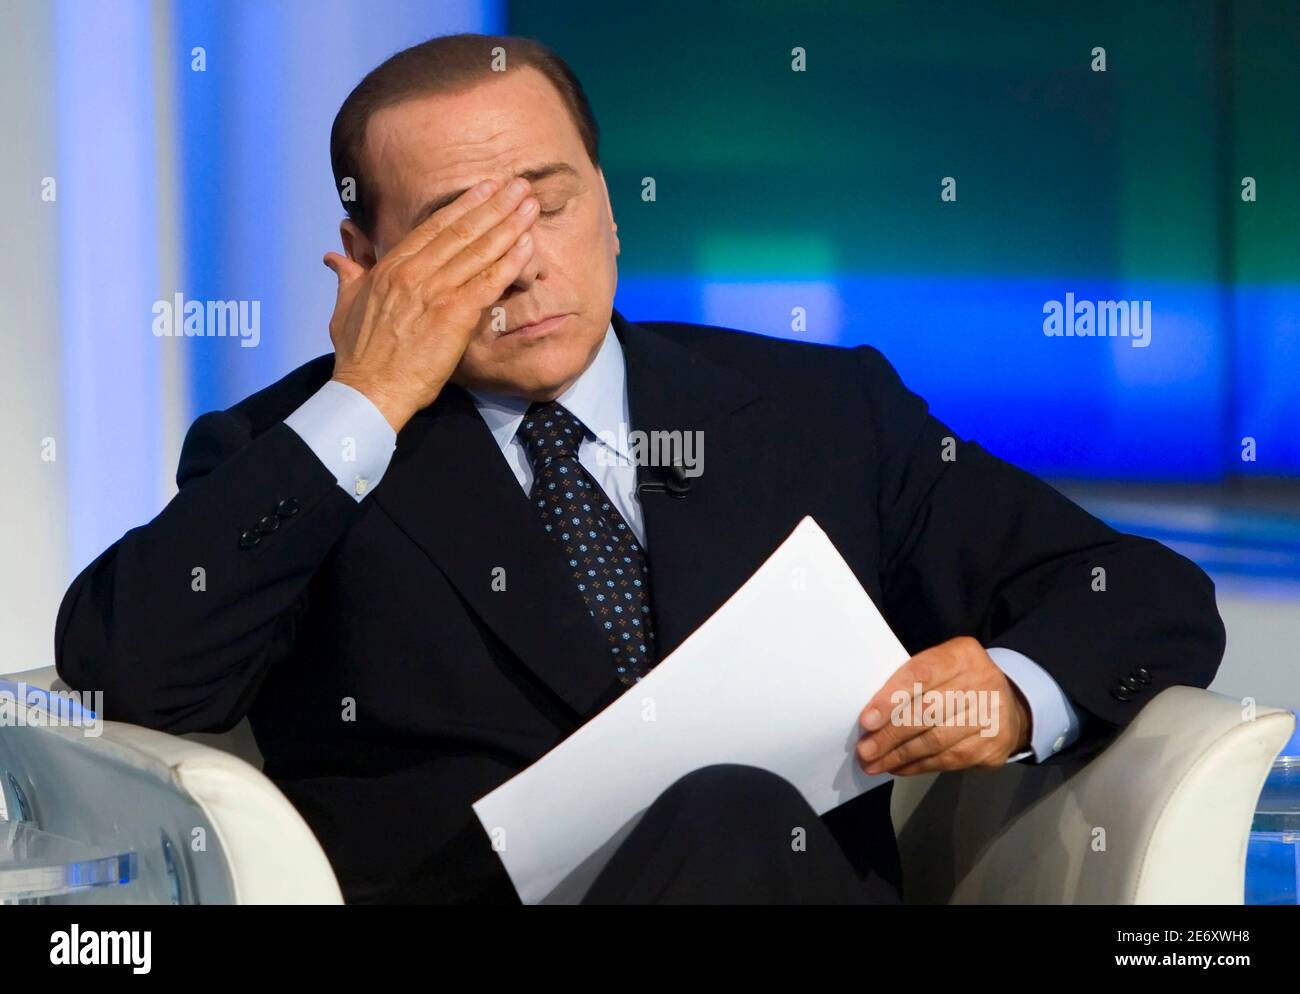 Italy's Prime Minister Silvio Berlusconi attends the taping of the  television program Porta a Porta ("Door to door" in Italian) in Rome May 5,  2009. His wife Veronica said over the weekend